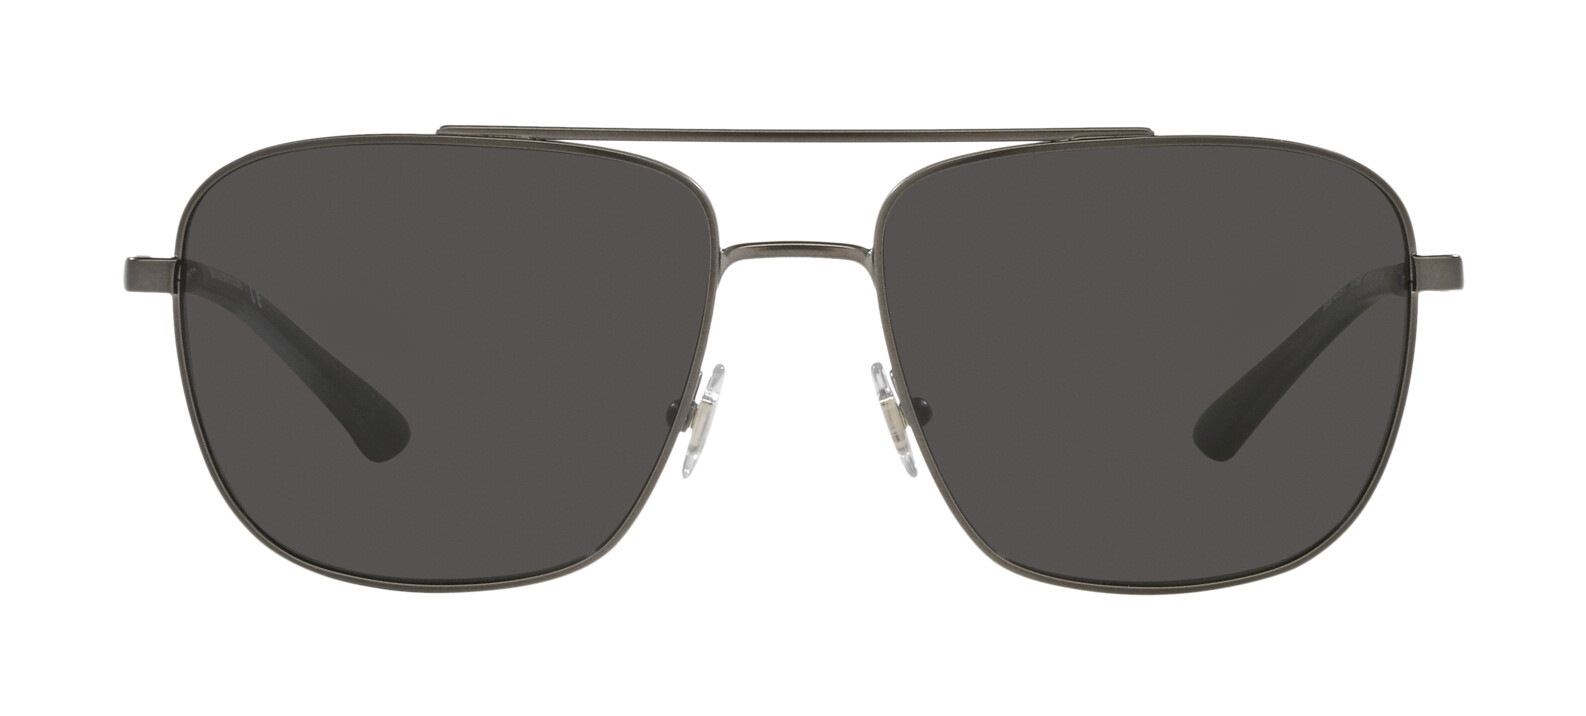 [products.image.front] Brooks Brothers 0BB4061 101687 Sonnenbrille